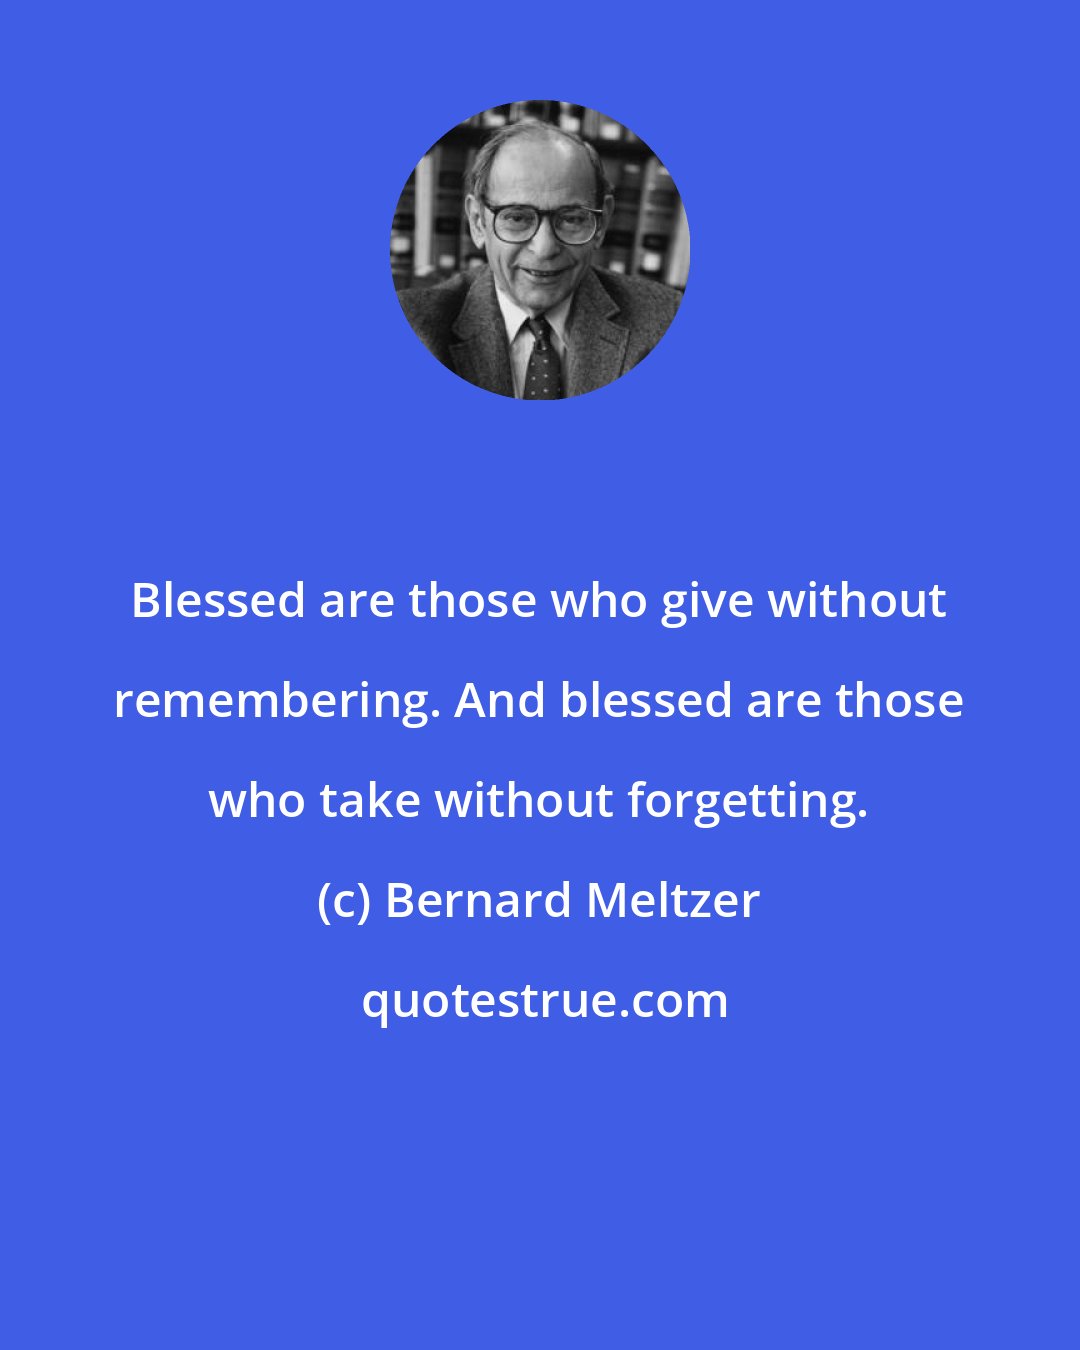 Bernard Meltzer: Blessed are those who give without remembering. And blessed are those who take without forgetting.